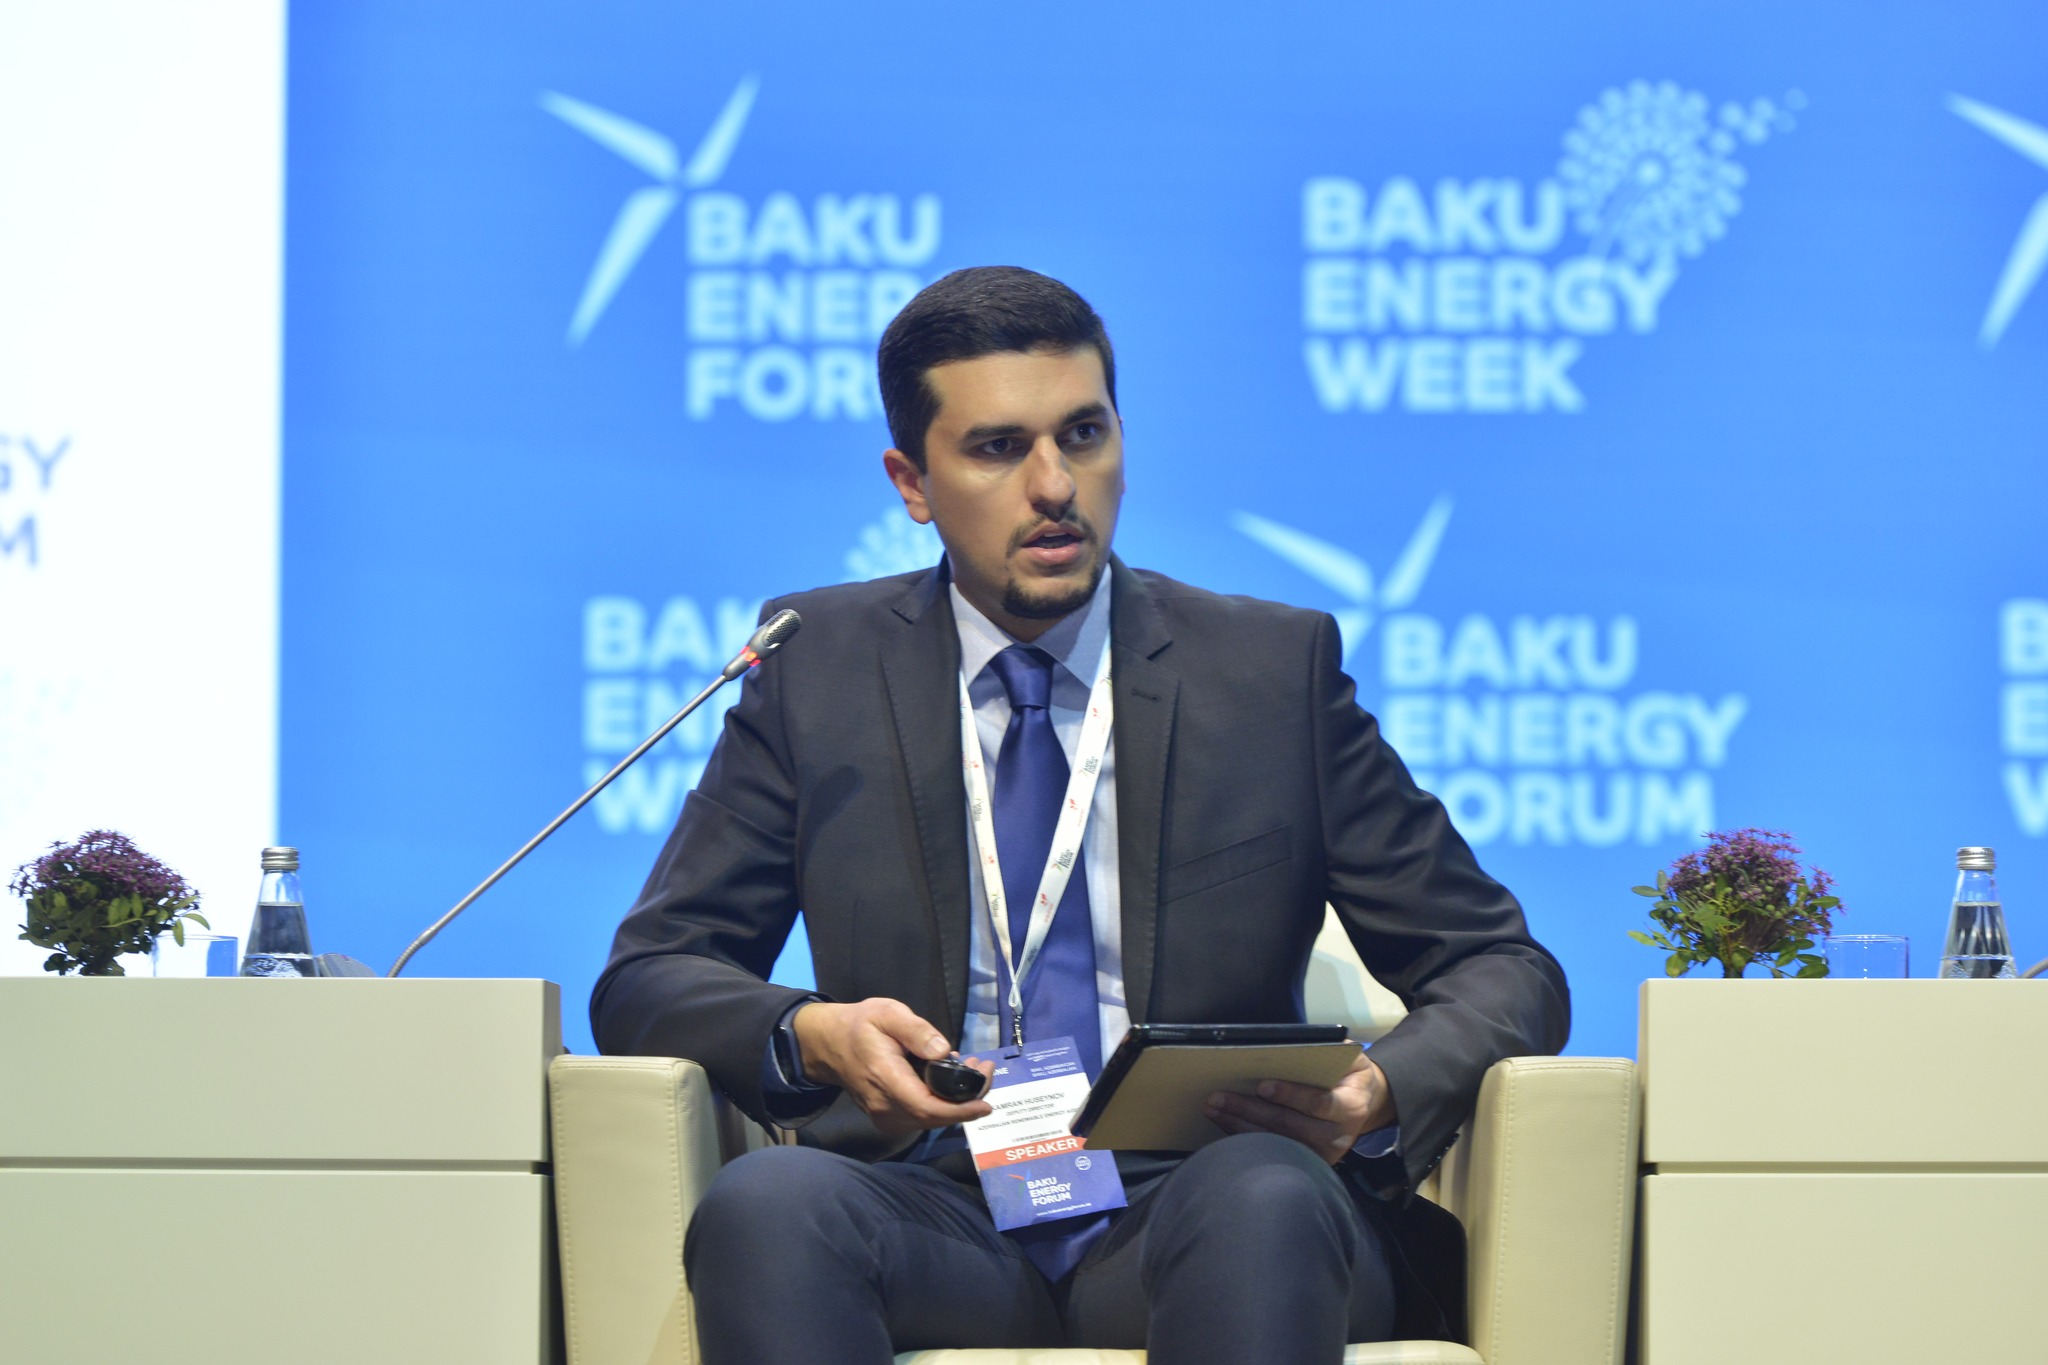 Kamran Huseynov, Deputy director of AREA, announced the results of the "Low-carbon hydrogen economy market research" at the 28th Baku Energy Forum